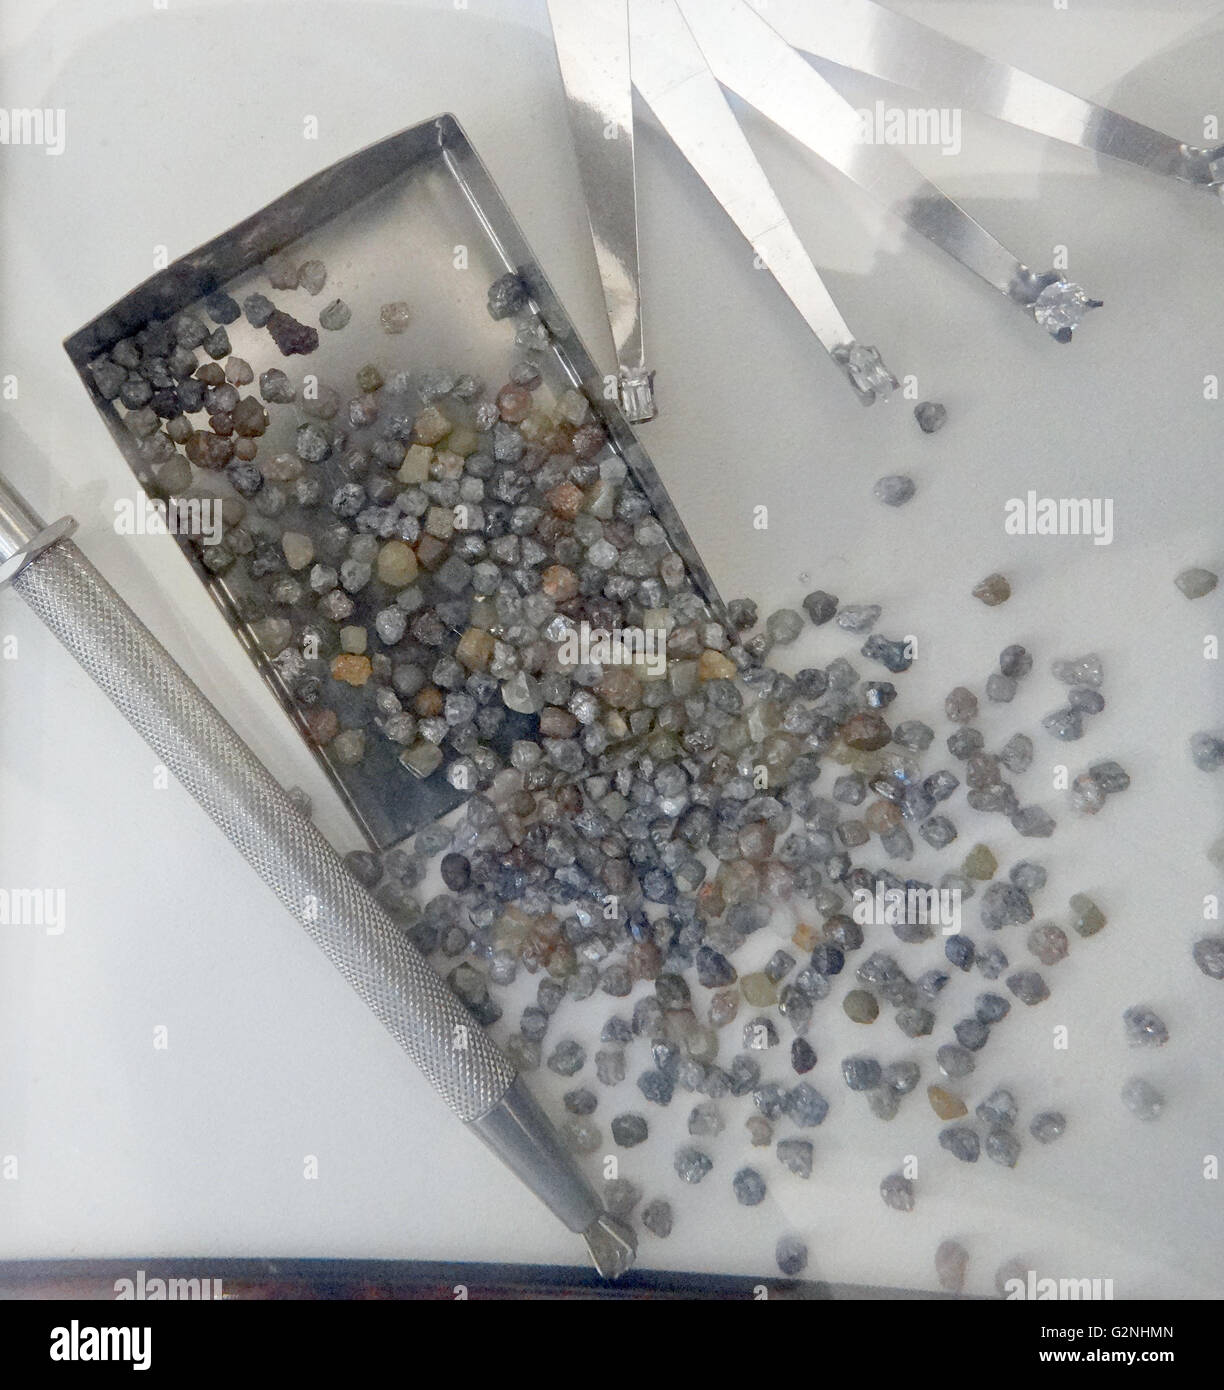 Sample of diamonds in their raw state. They can be typically yellow, brown or Gray to colourless. Less often blue, green, black, translucent white, pink, violet, orange, purple and red in colour before being processed. Dated 2014 Stock Photo